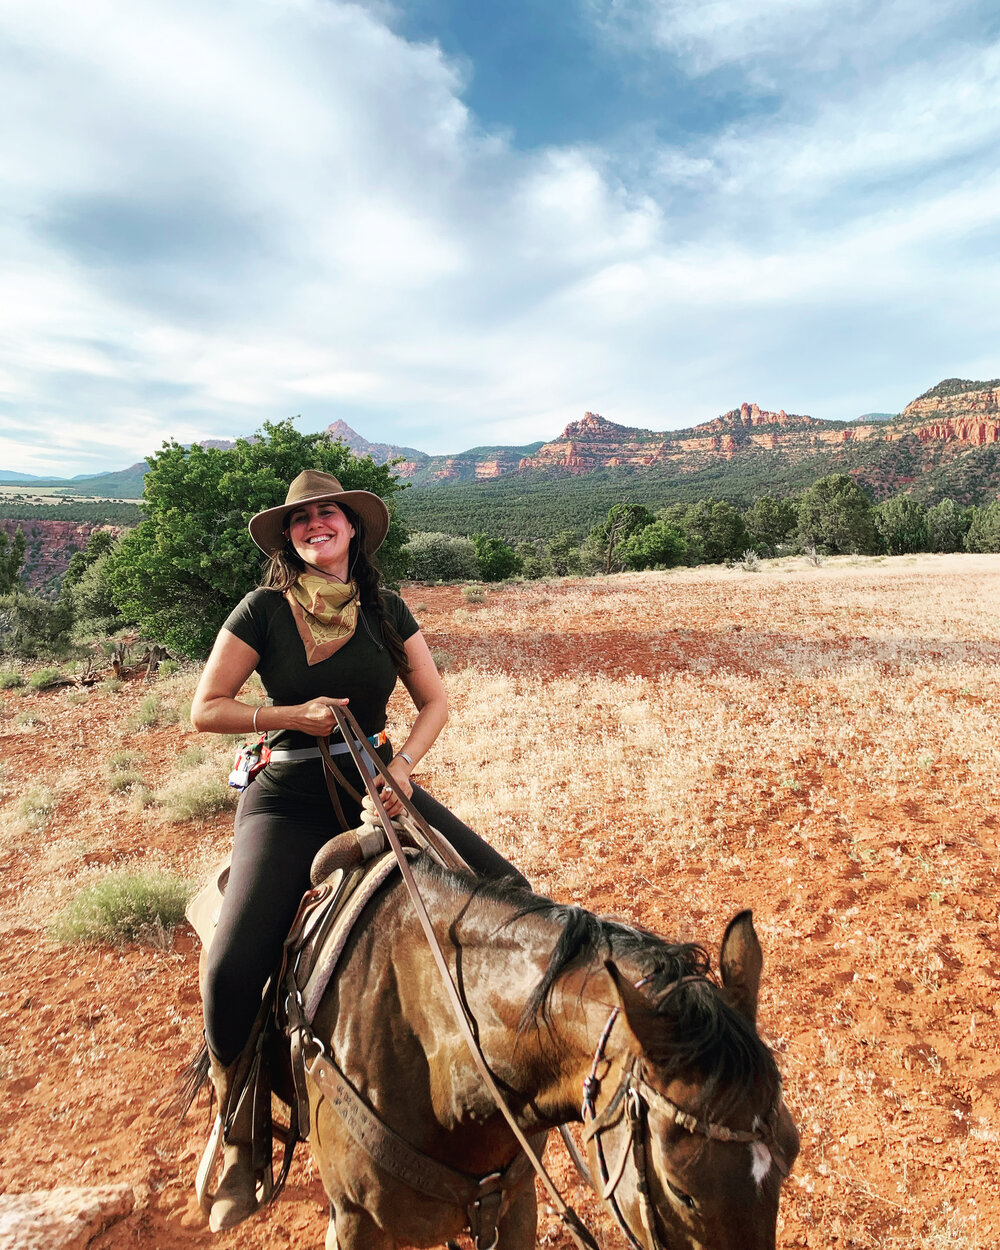  Me in my happy place at Zion Wright Family Ranch - Photo by Erin Shaw 